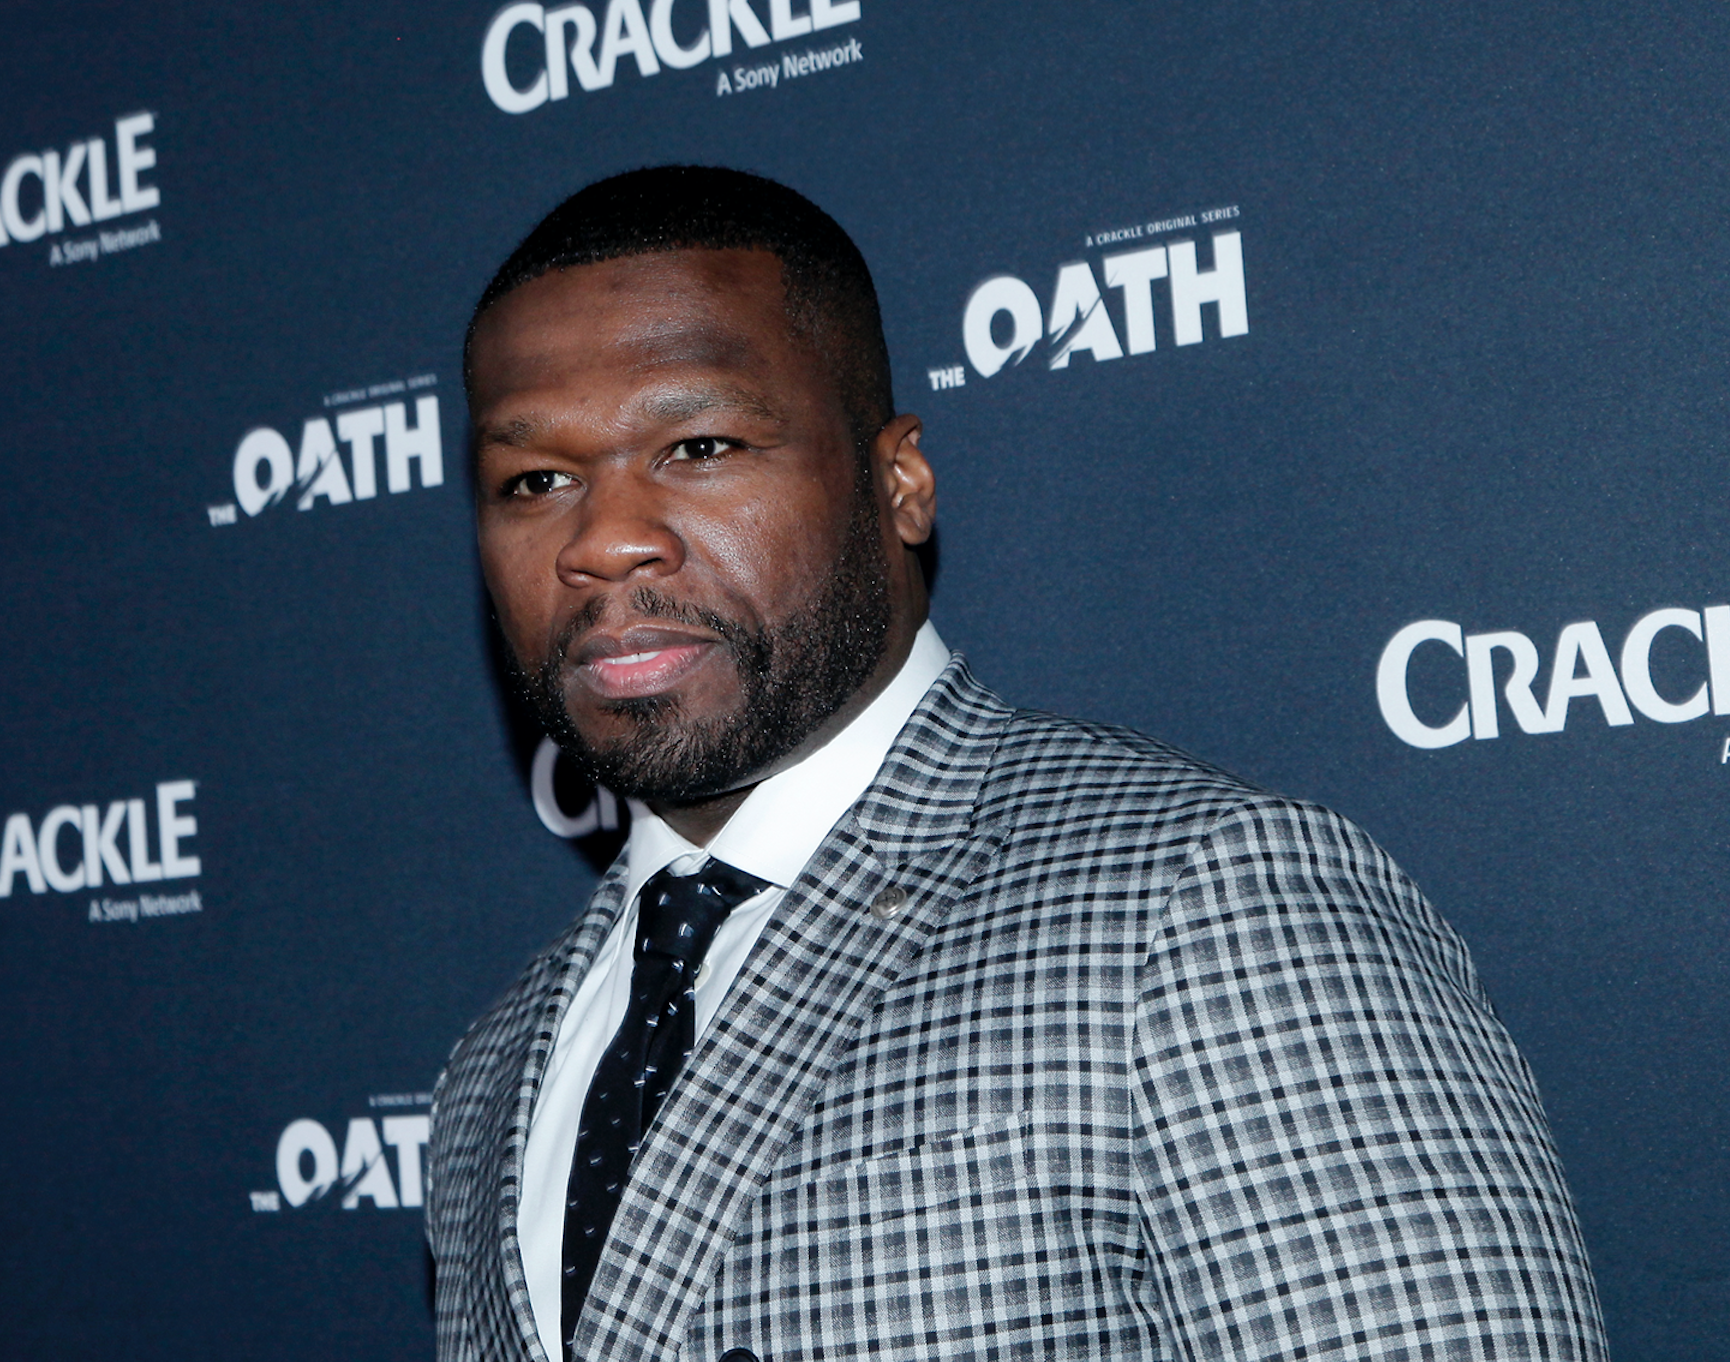 50 Cent S Music Video Filming The Site Of Shooting Investigation